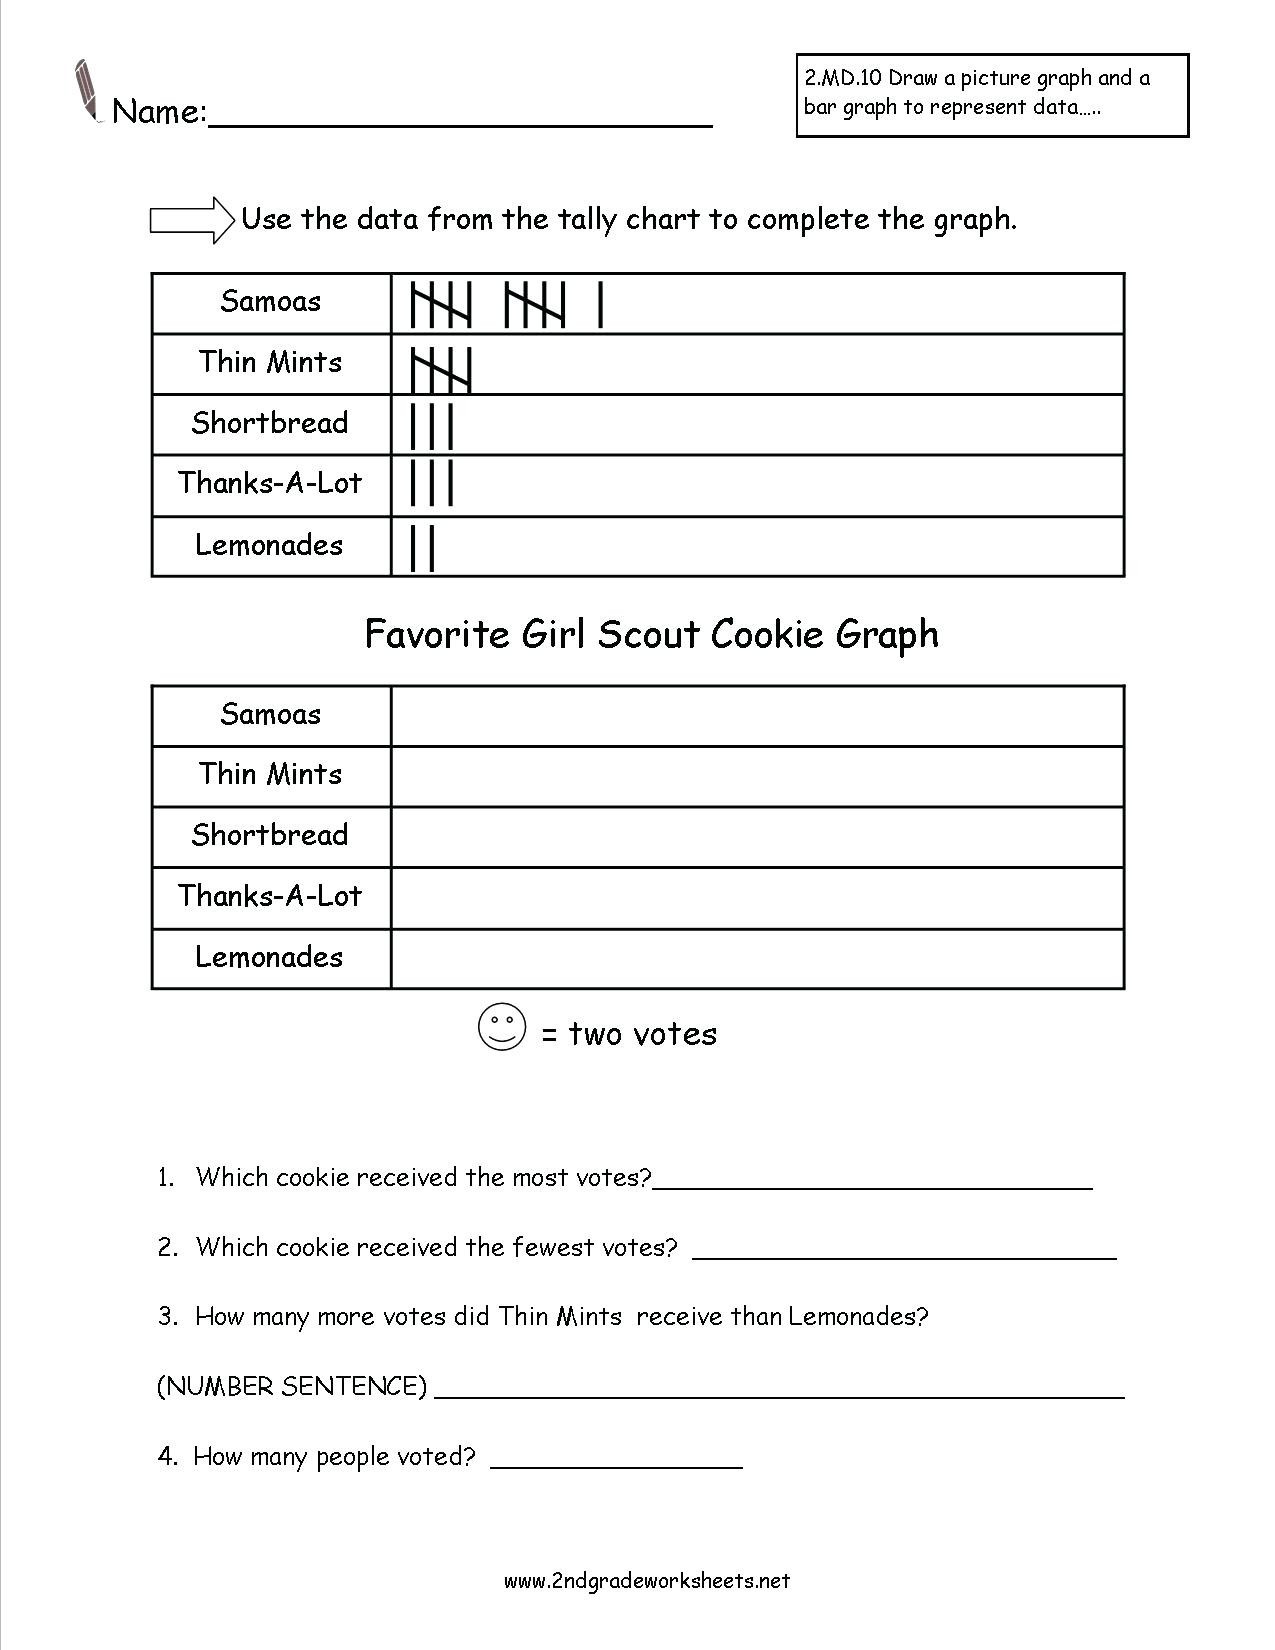 2nd grade assessment test printable math ideas accounting grade of 8th grade math placement test